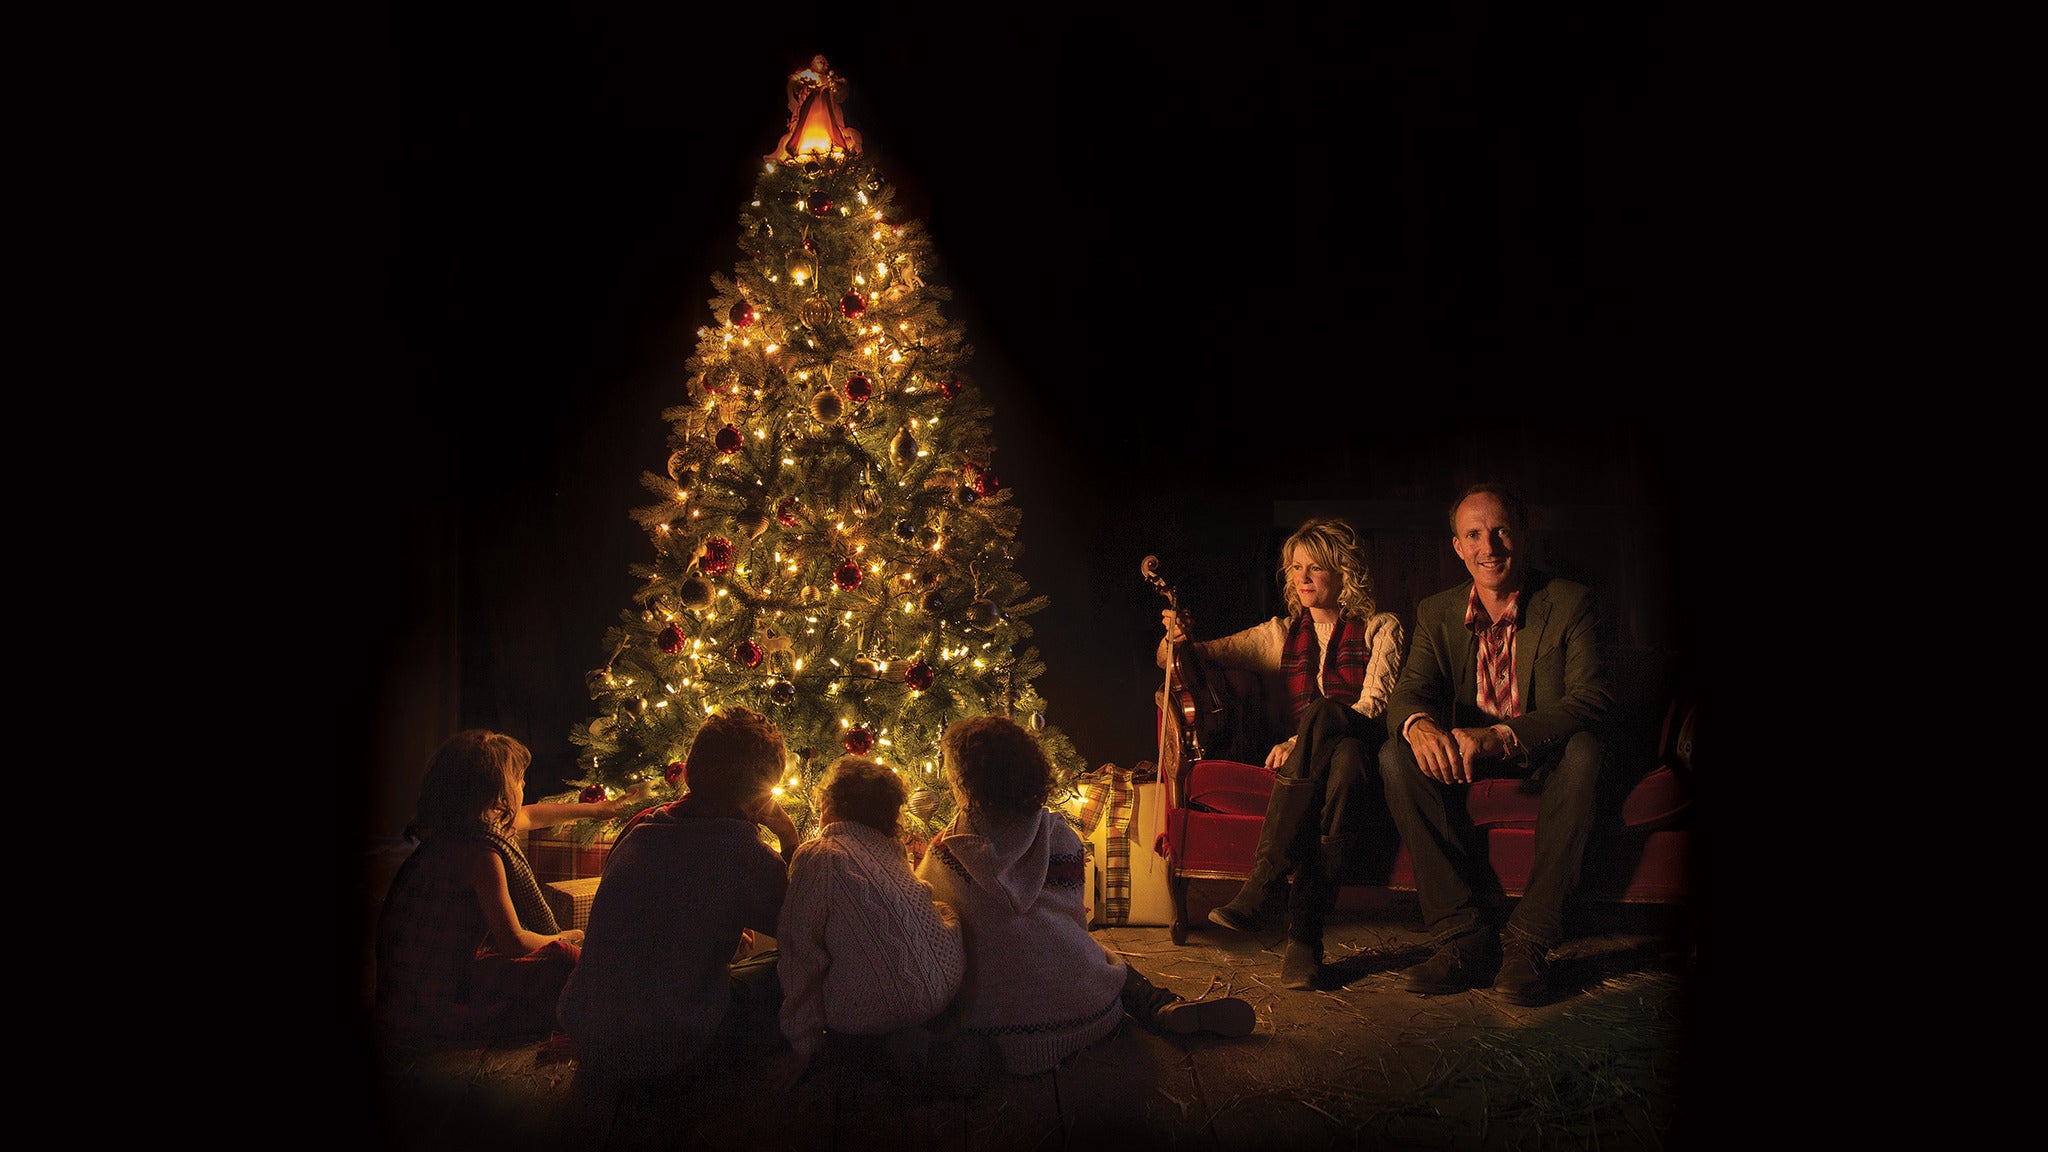 Natalie Macmaster & Donnell Leahy: A Celtic Family Christmas pre-sale code for early tickets in Edmonton